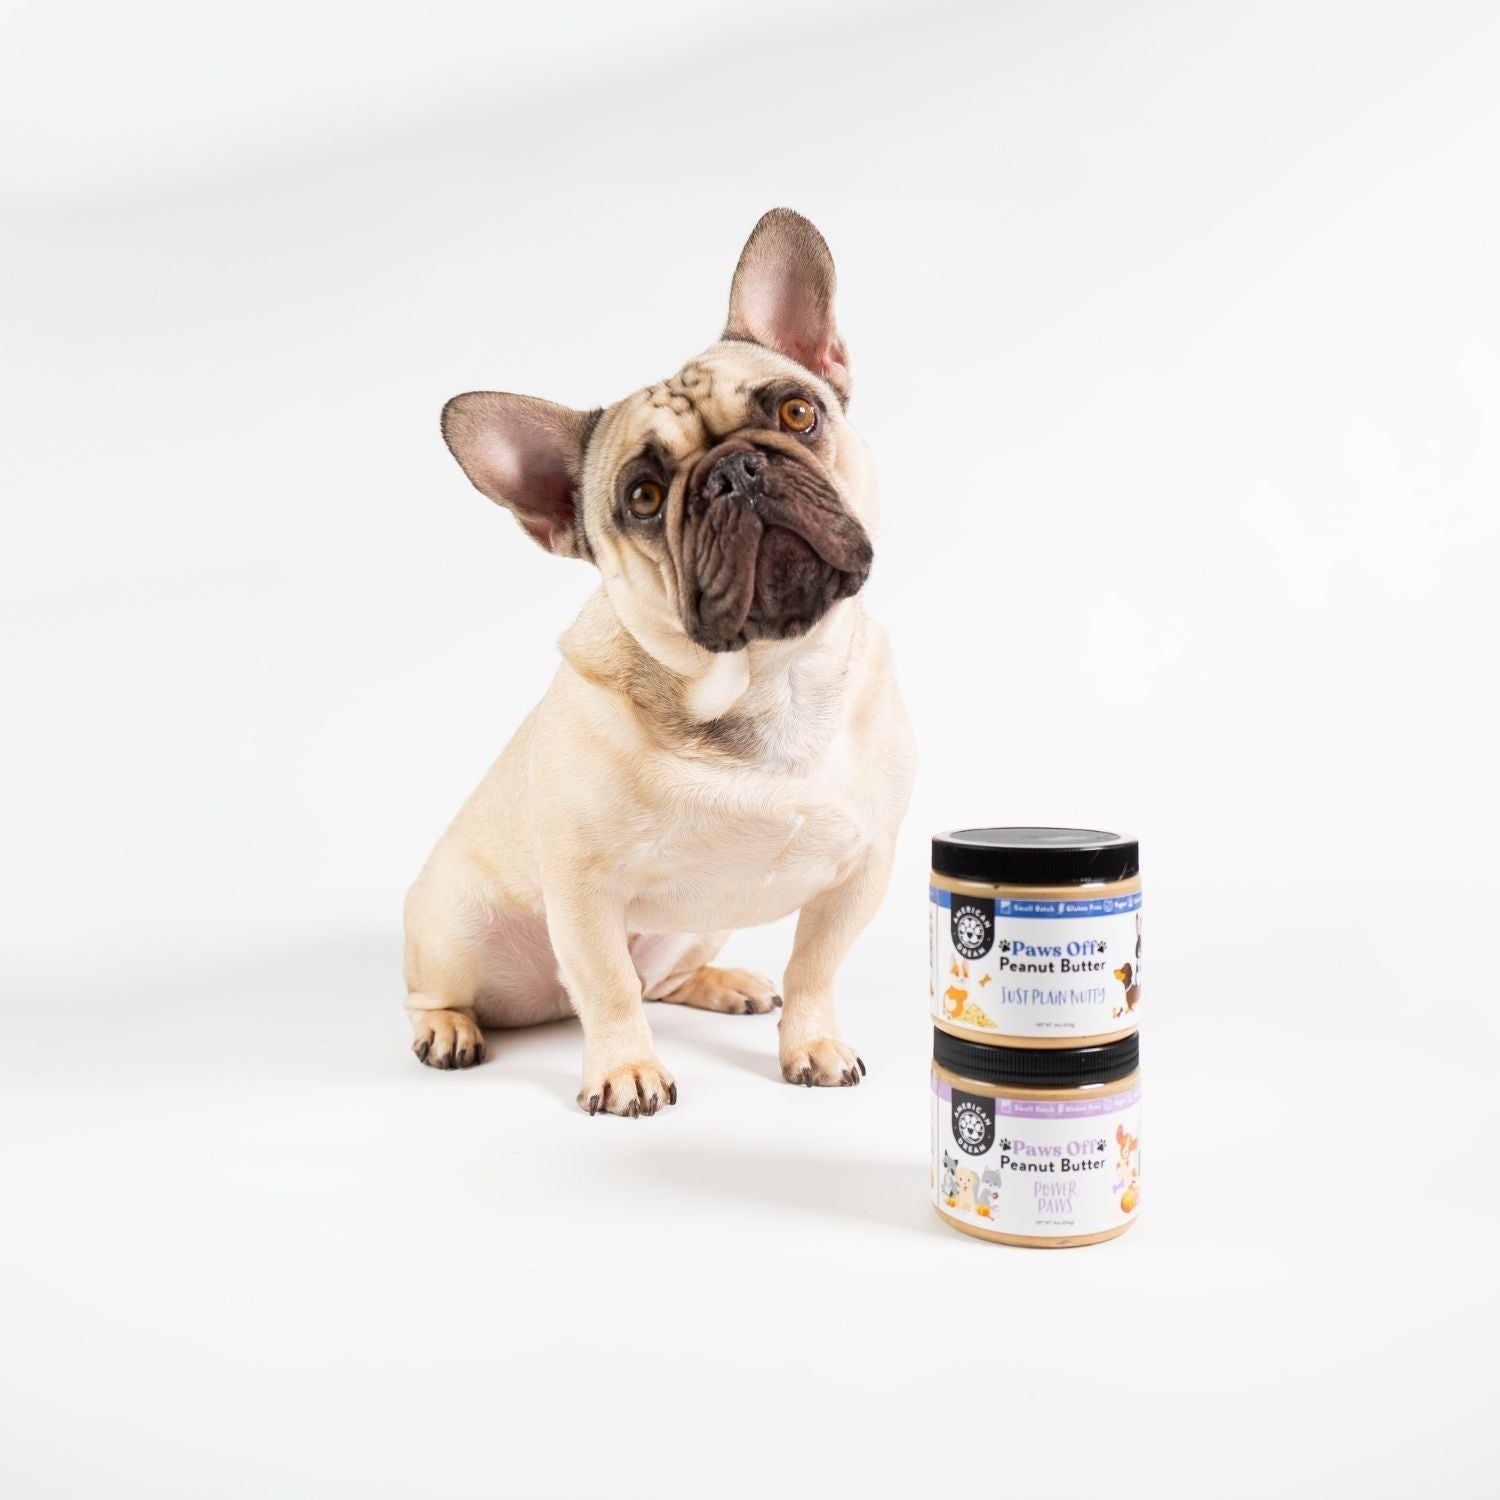 Gluten-Free Paws Off Power Paws Peanut Butter